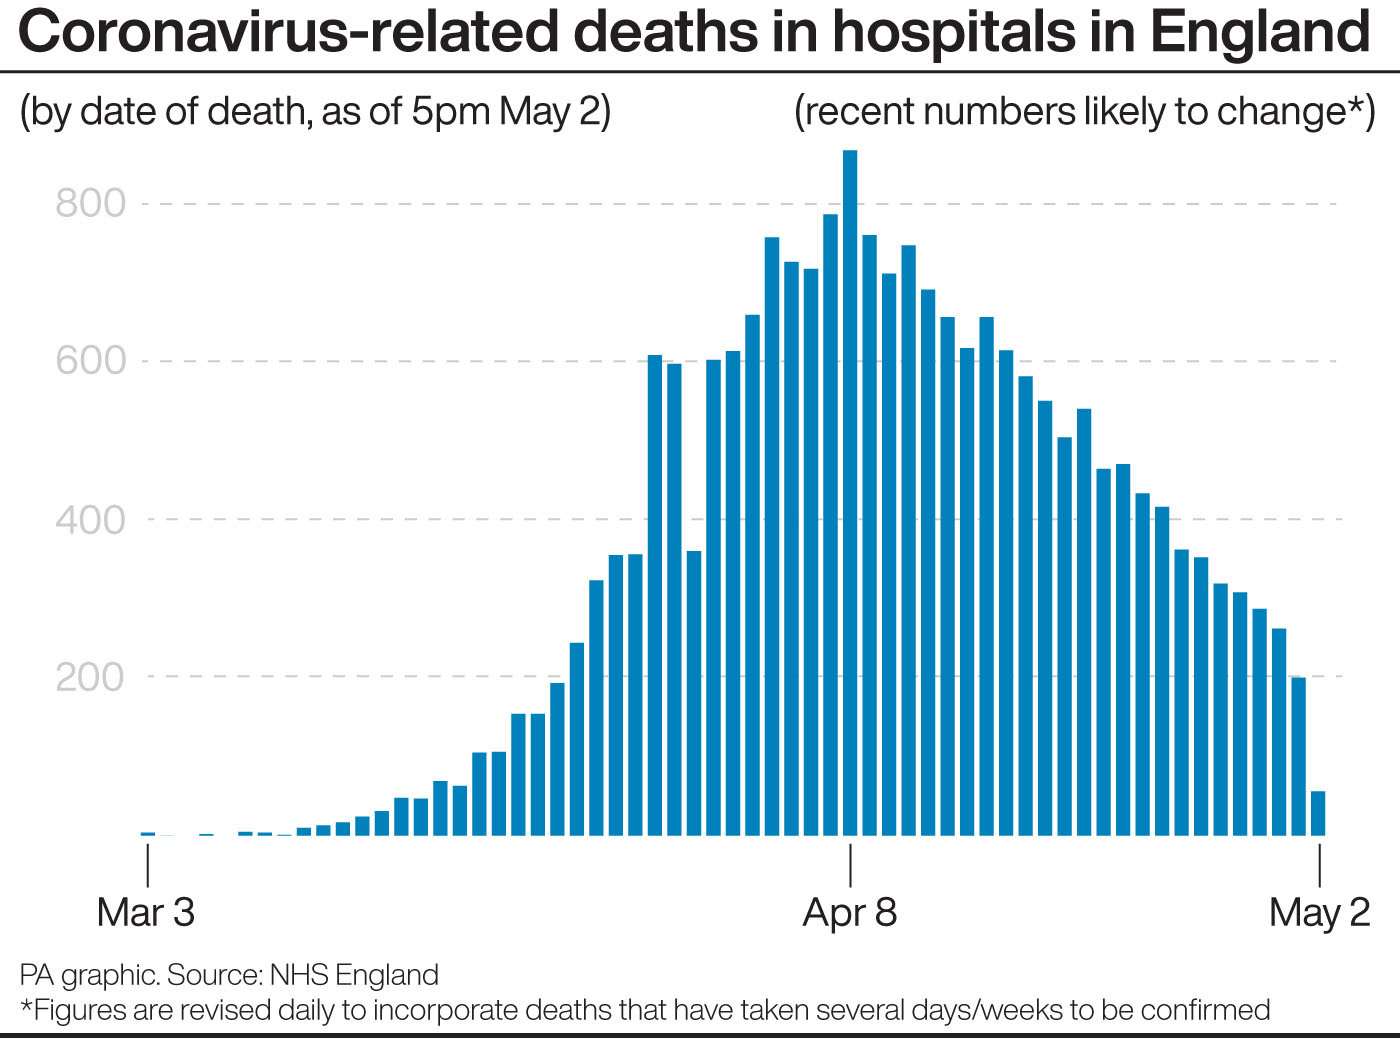 Coronavirus-related deaths in hospitals in England (PA Graphics)